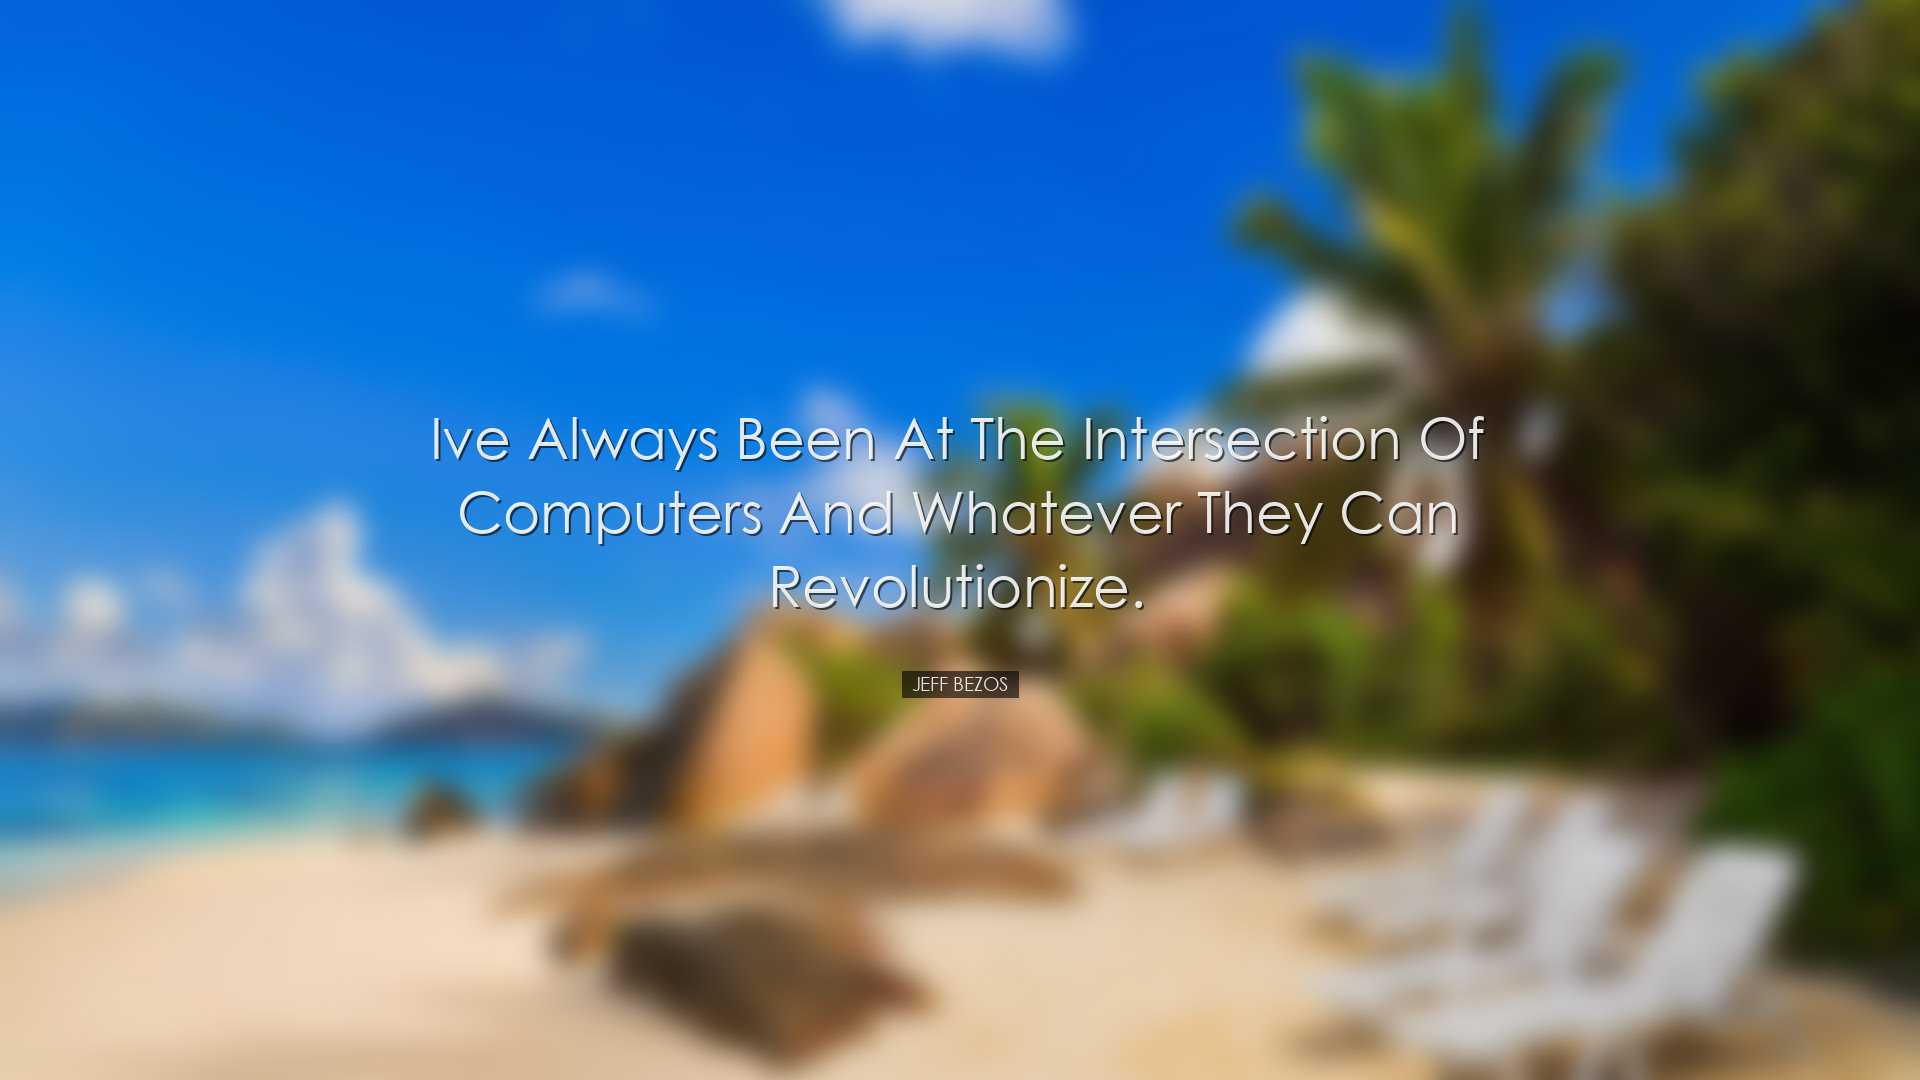 Ive always been at the intersection of computers and whatever they